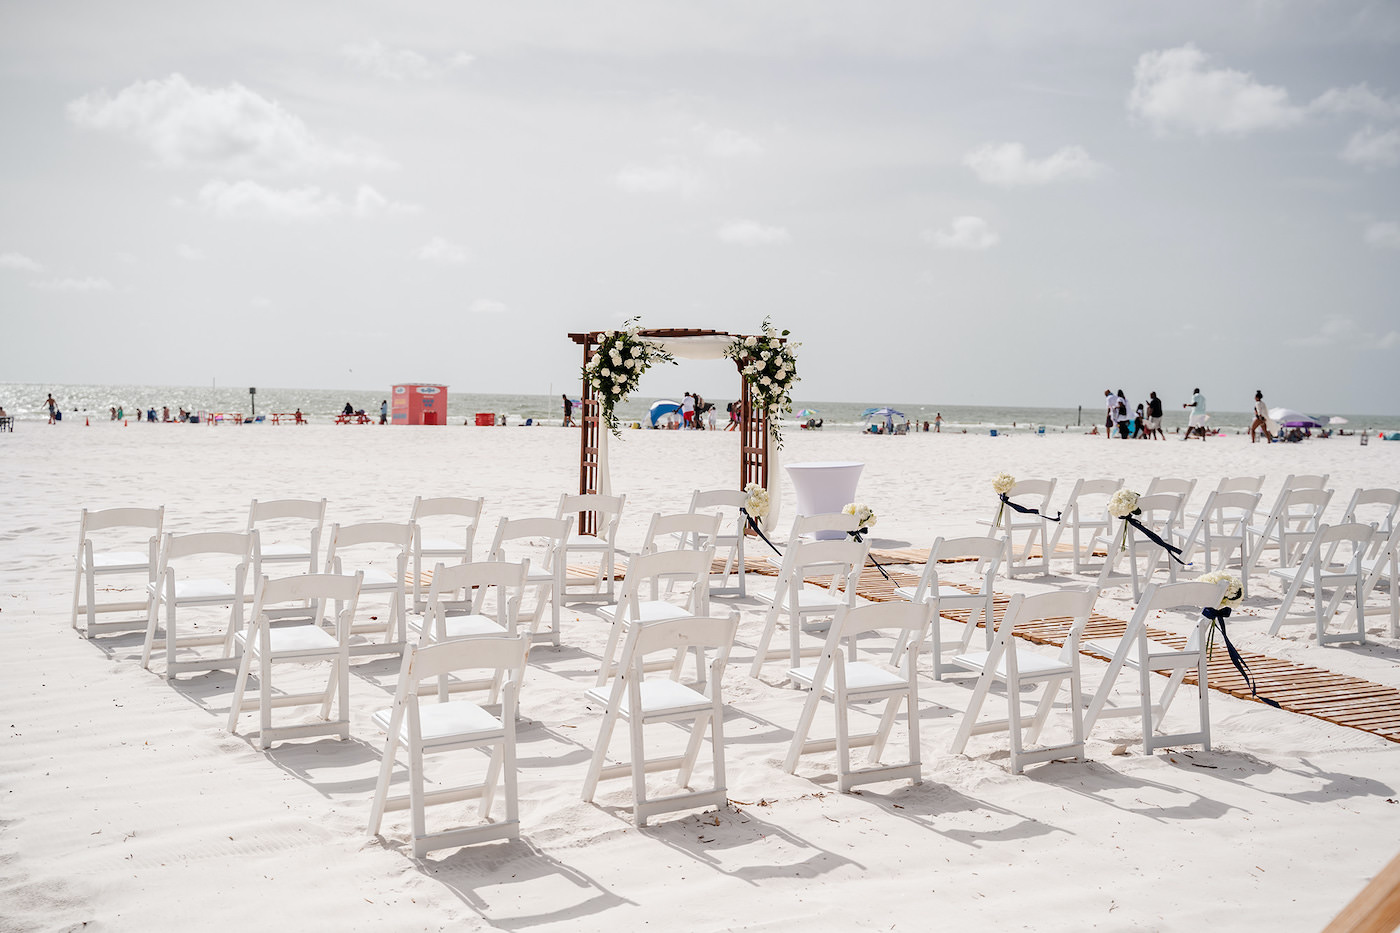 Tampa Bay Beach Wedding Ceremony, Outdoor Beachfront Ceremony on the White Powder Sand with Tropical Decor, Wooden Arch with Elegant White Floral Bouquets with Greenery, Bamboo Wooden Aisle Runner | Florida Hotel and Wedding Venue Hilton Clearwater Beach